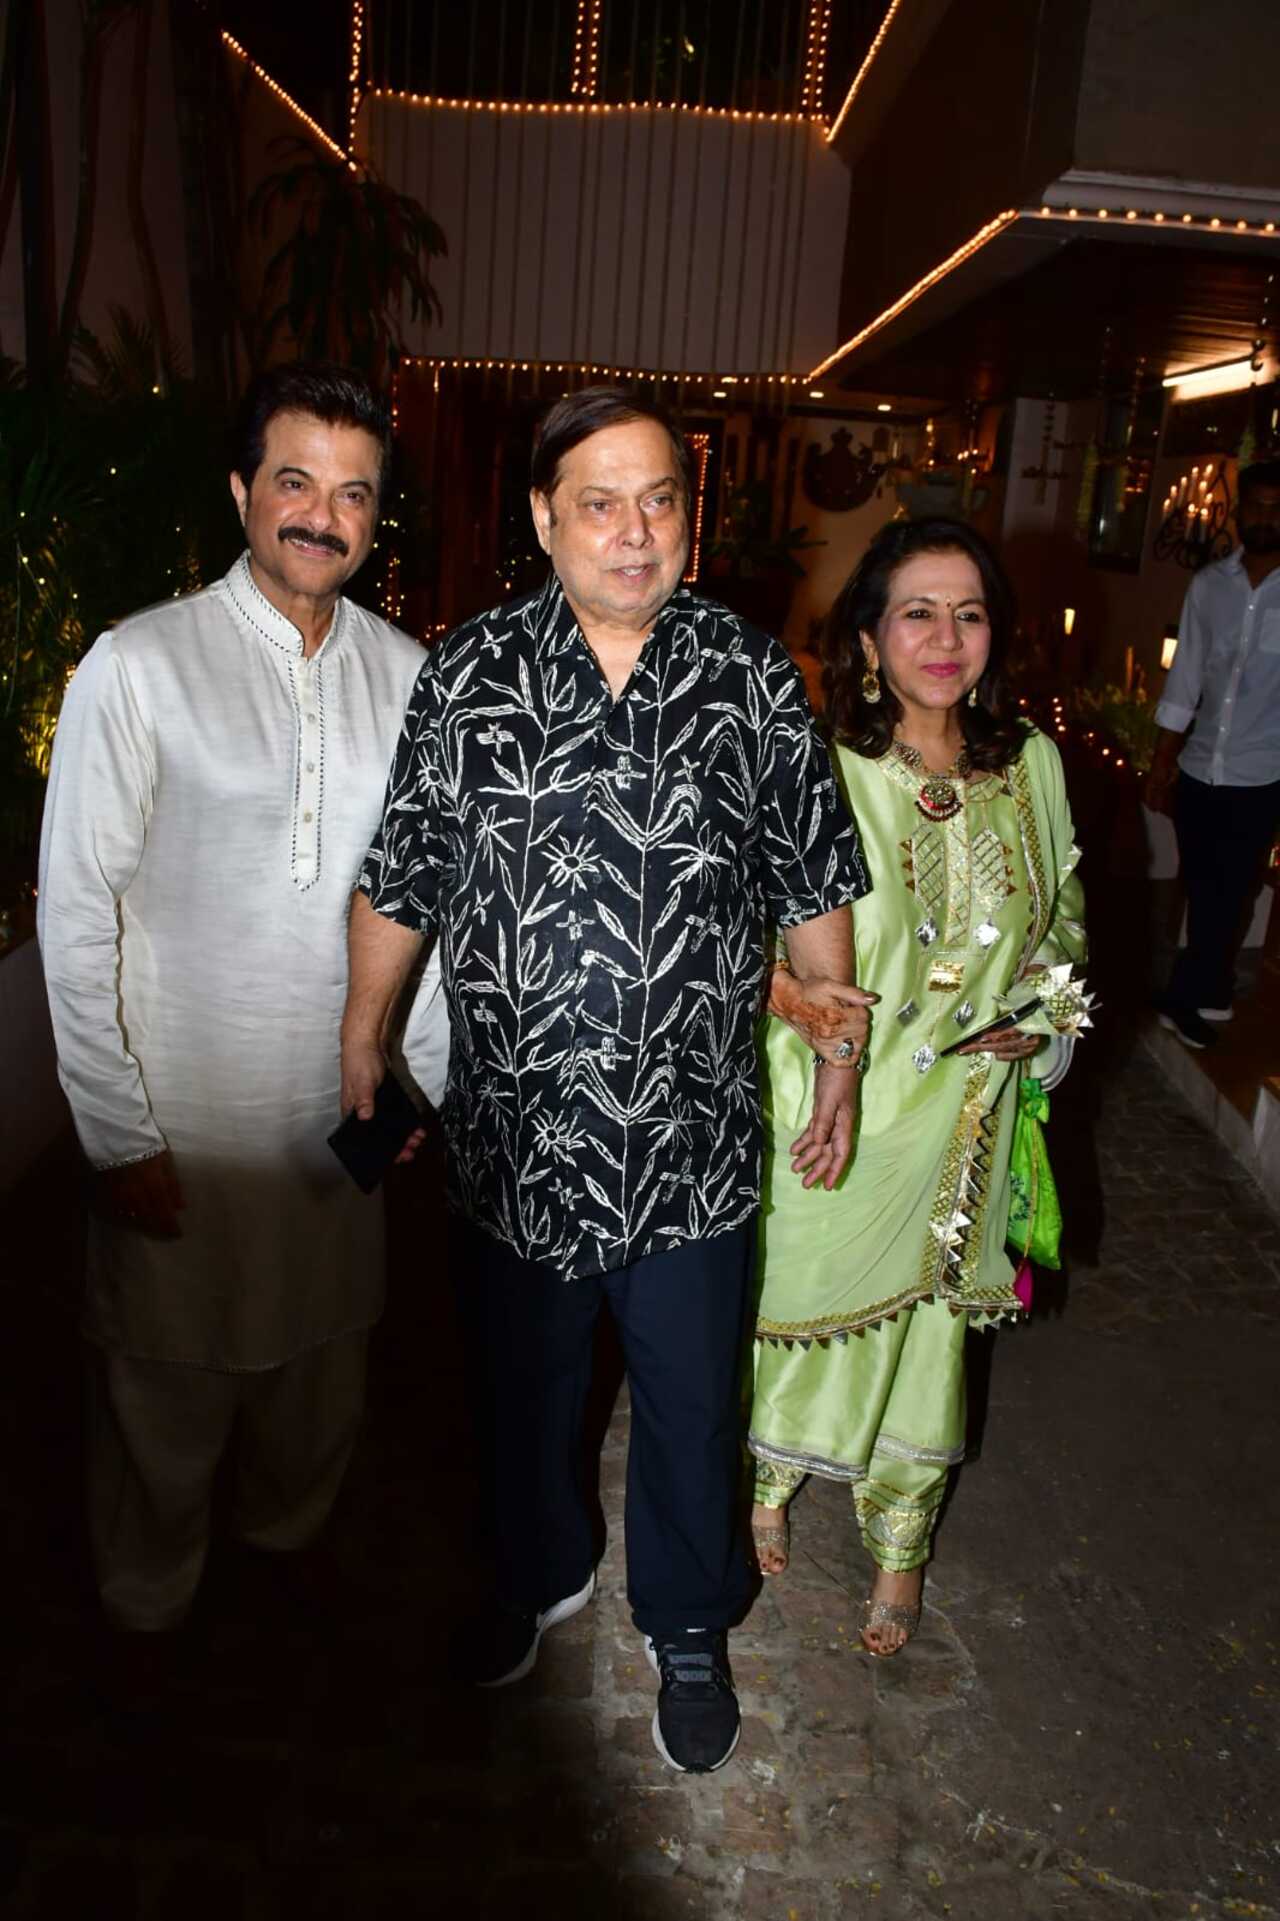 David Dhawan and his wife pose with Anil Kapoor at the latter's residence